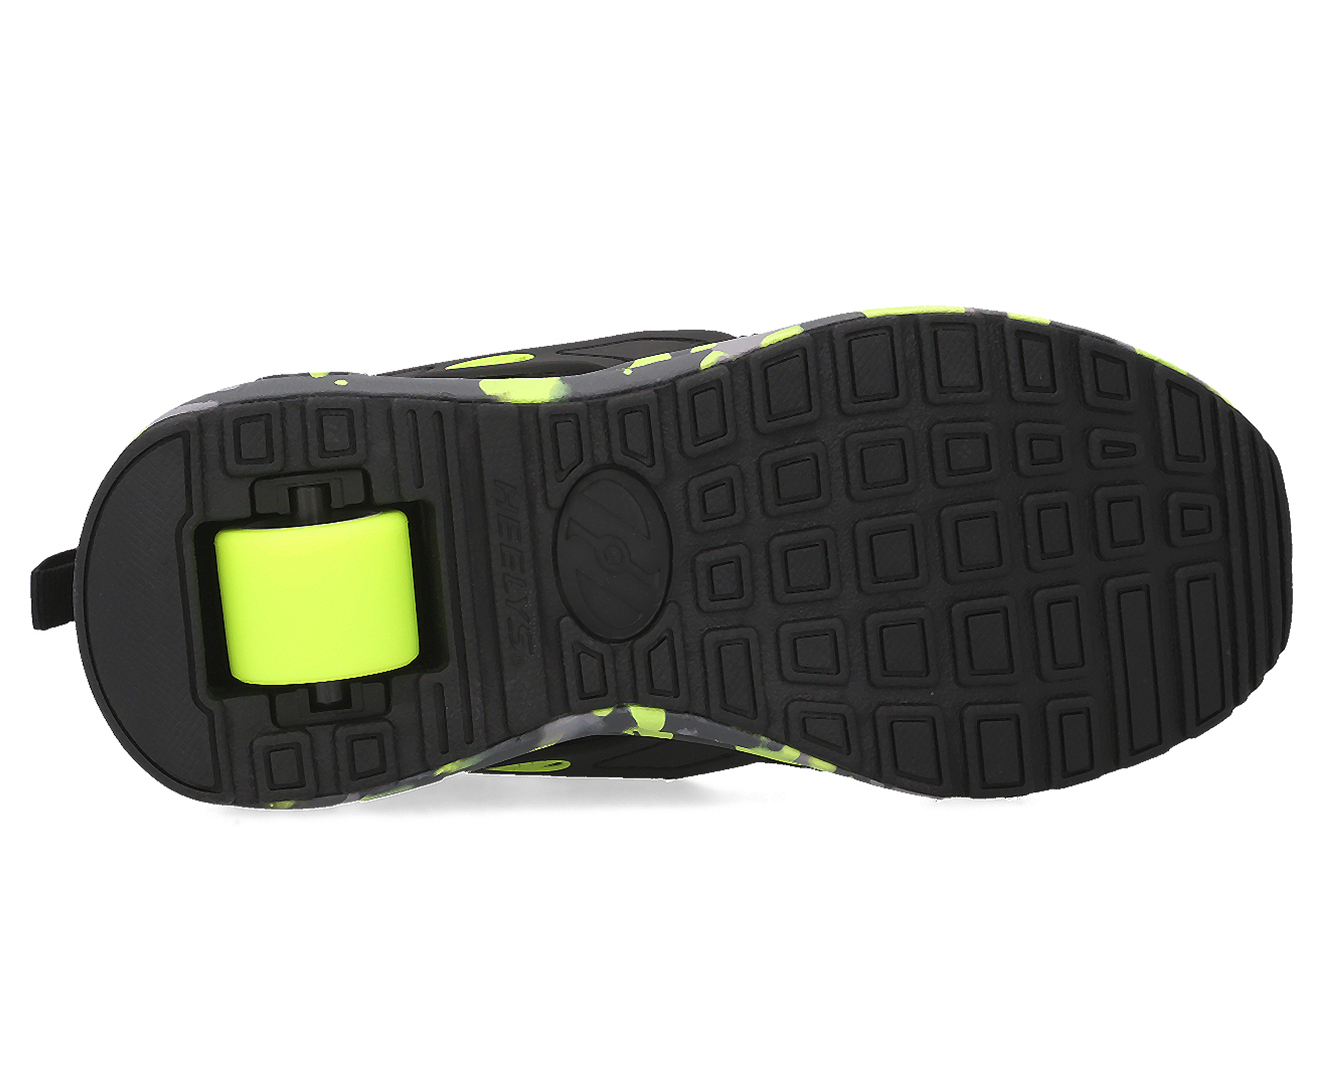 Heelys Boys' Force Skate Roller Shoes - Black/Bright Yellow | Catch.co.nz